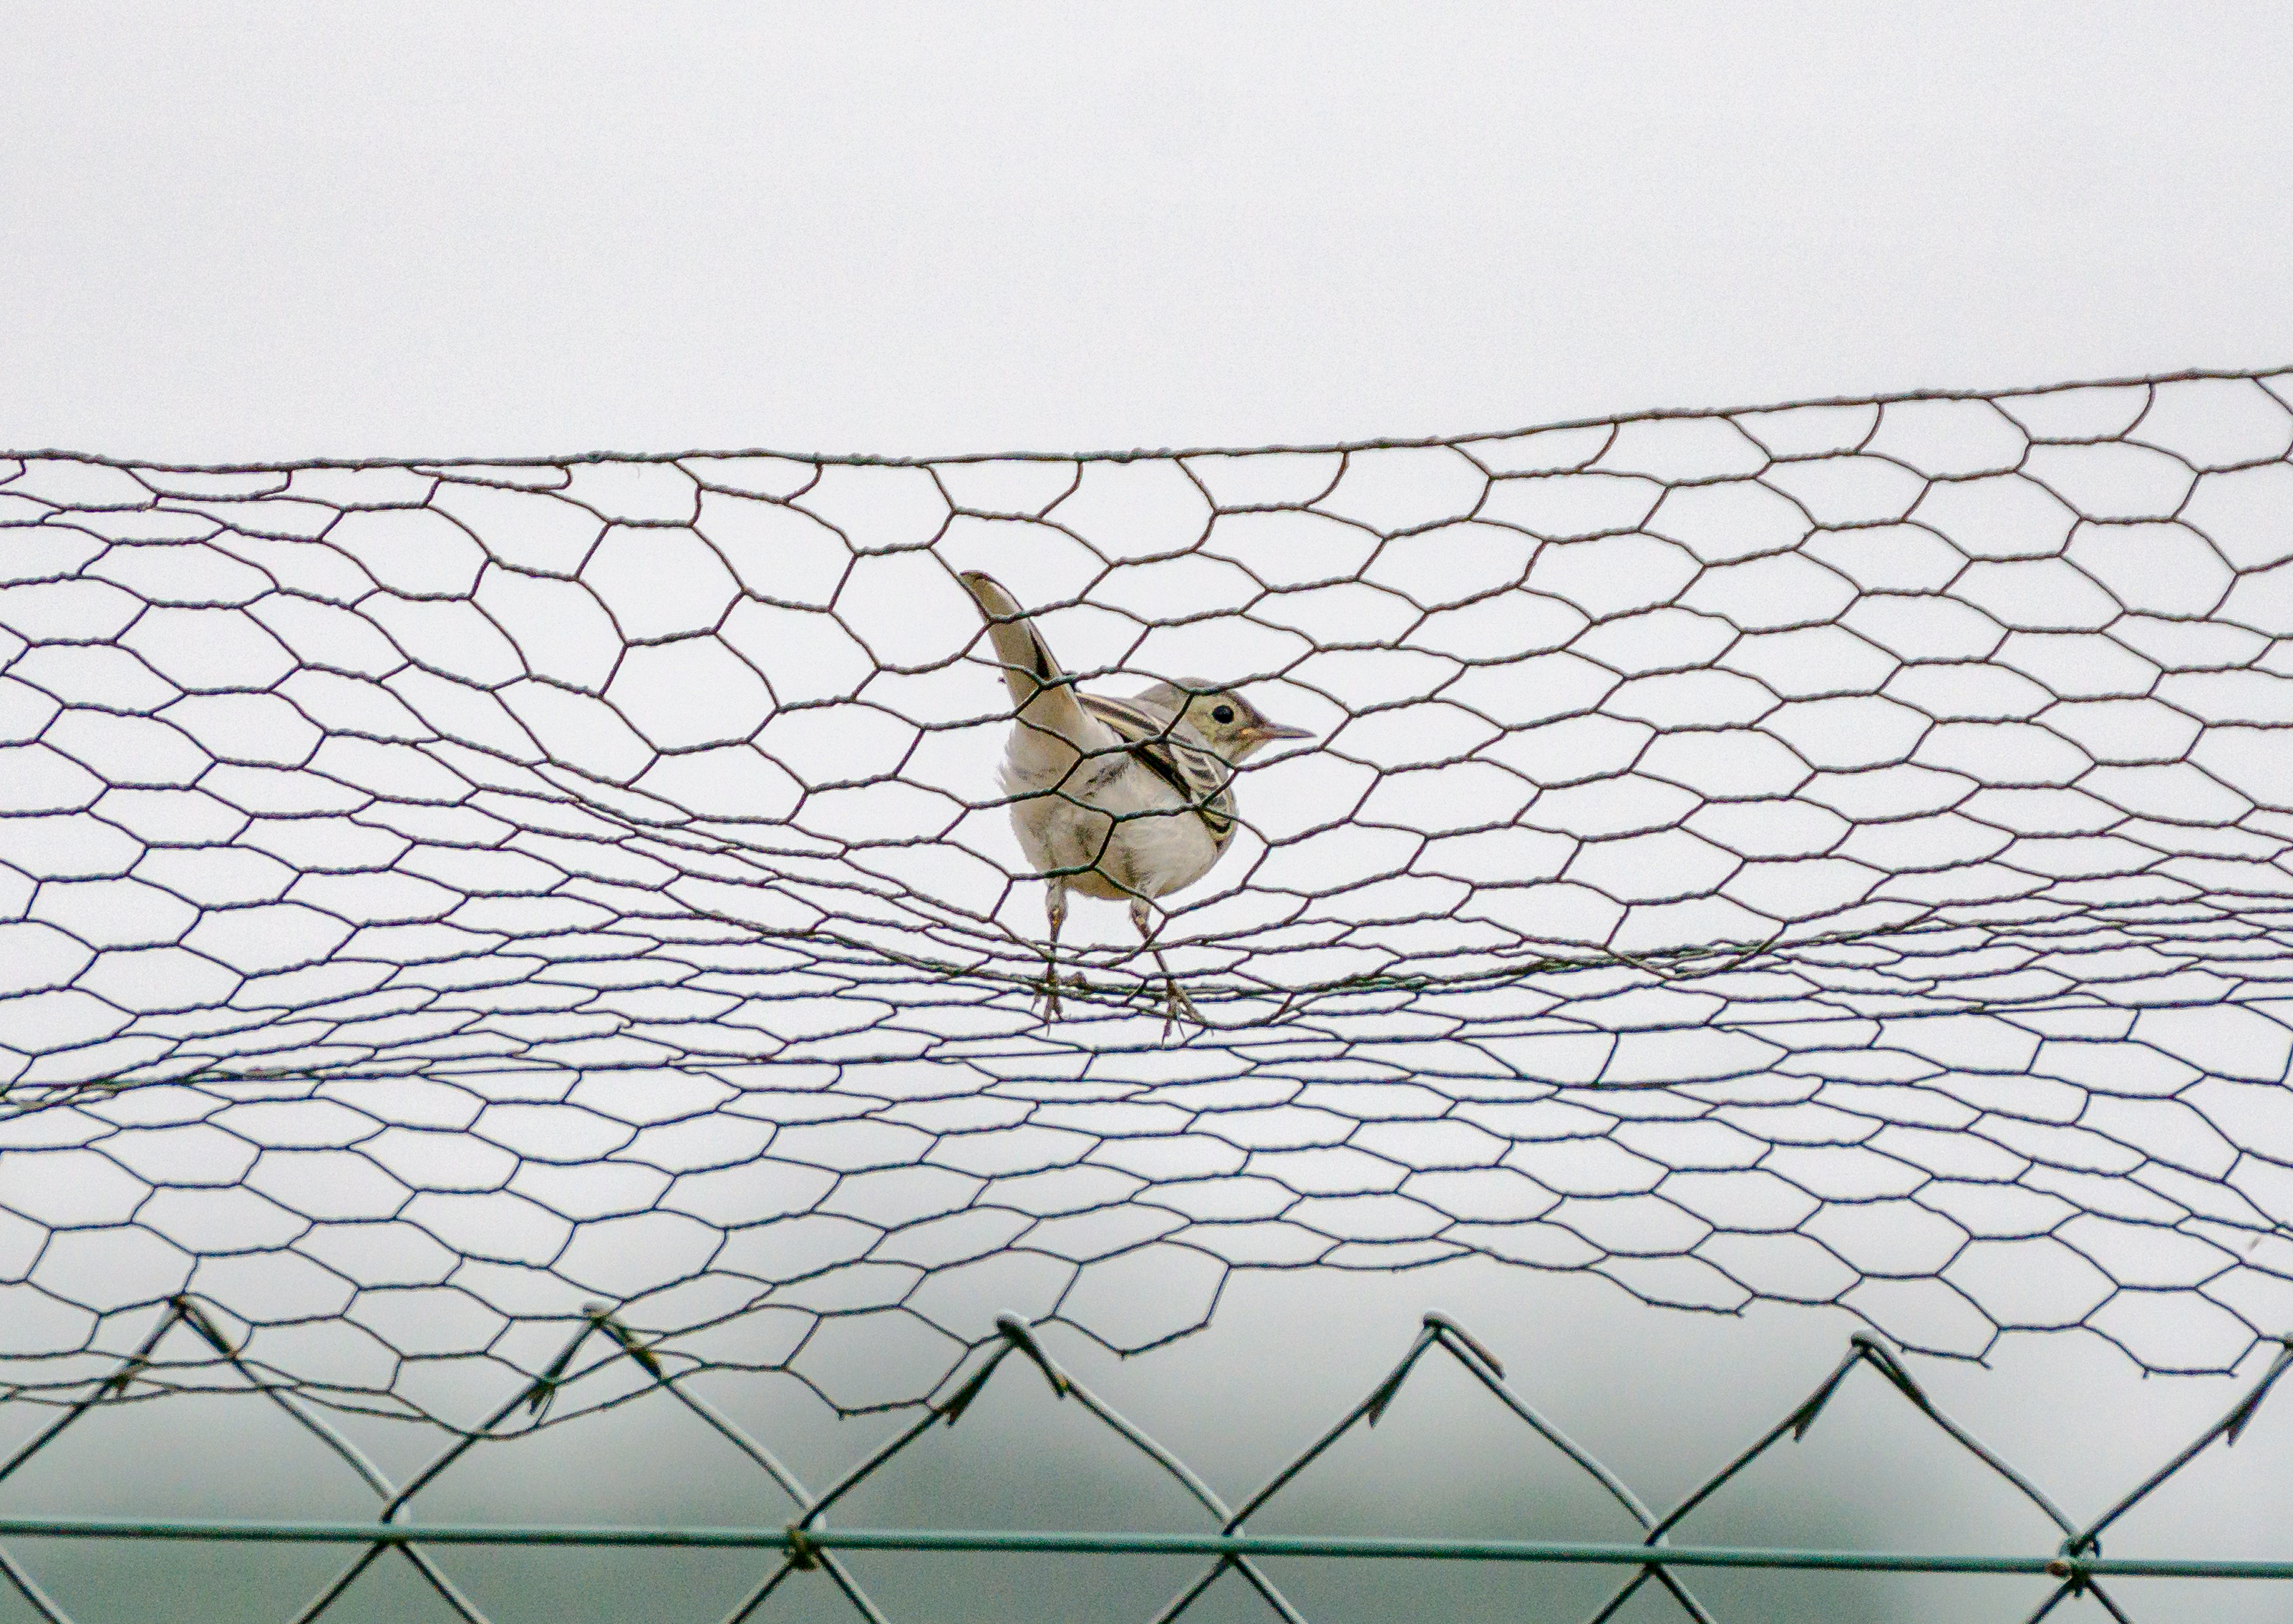 A light brown bird perched on some chicken wire over a wire fence